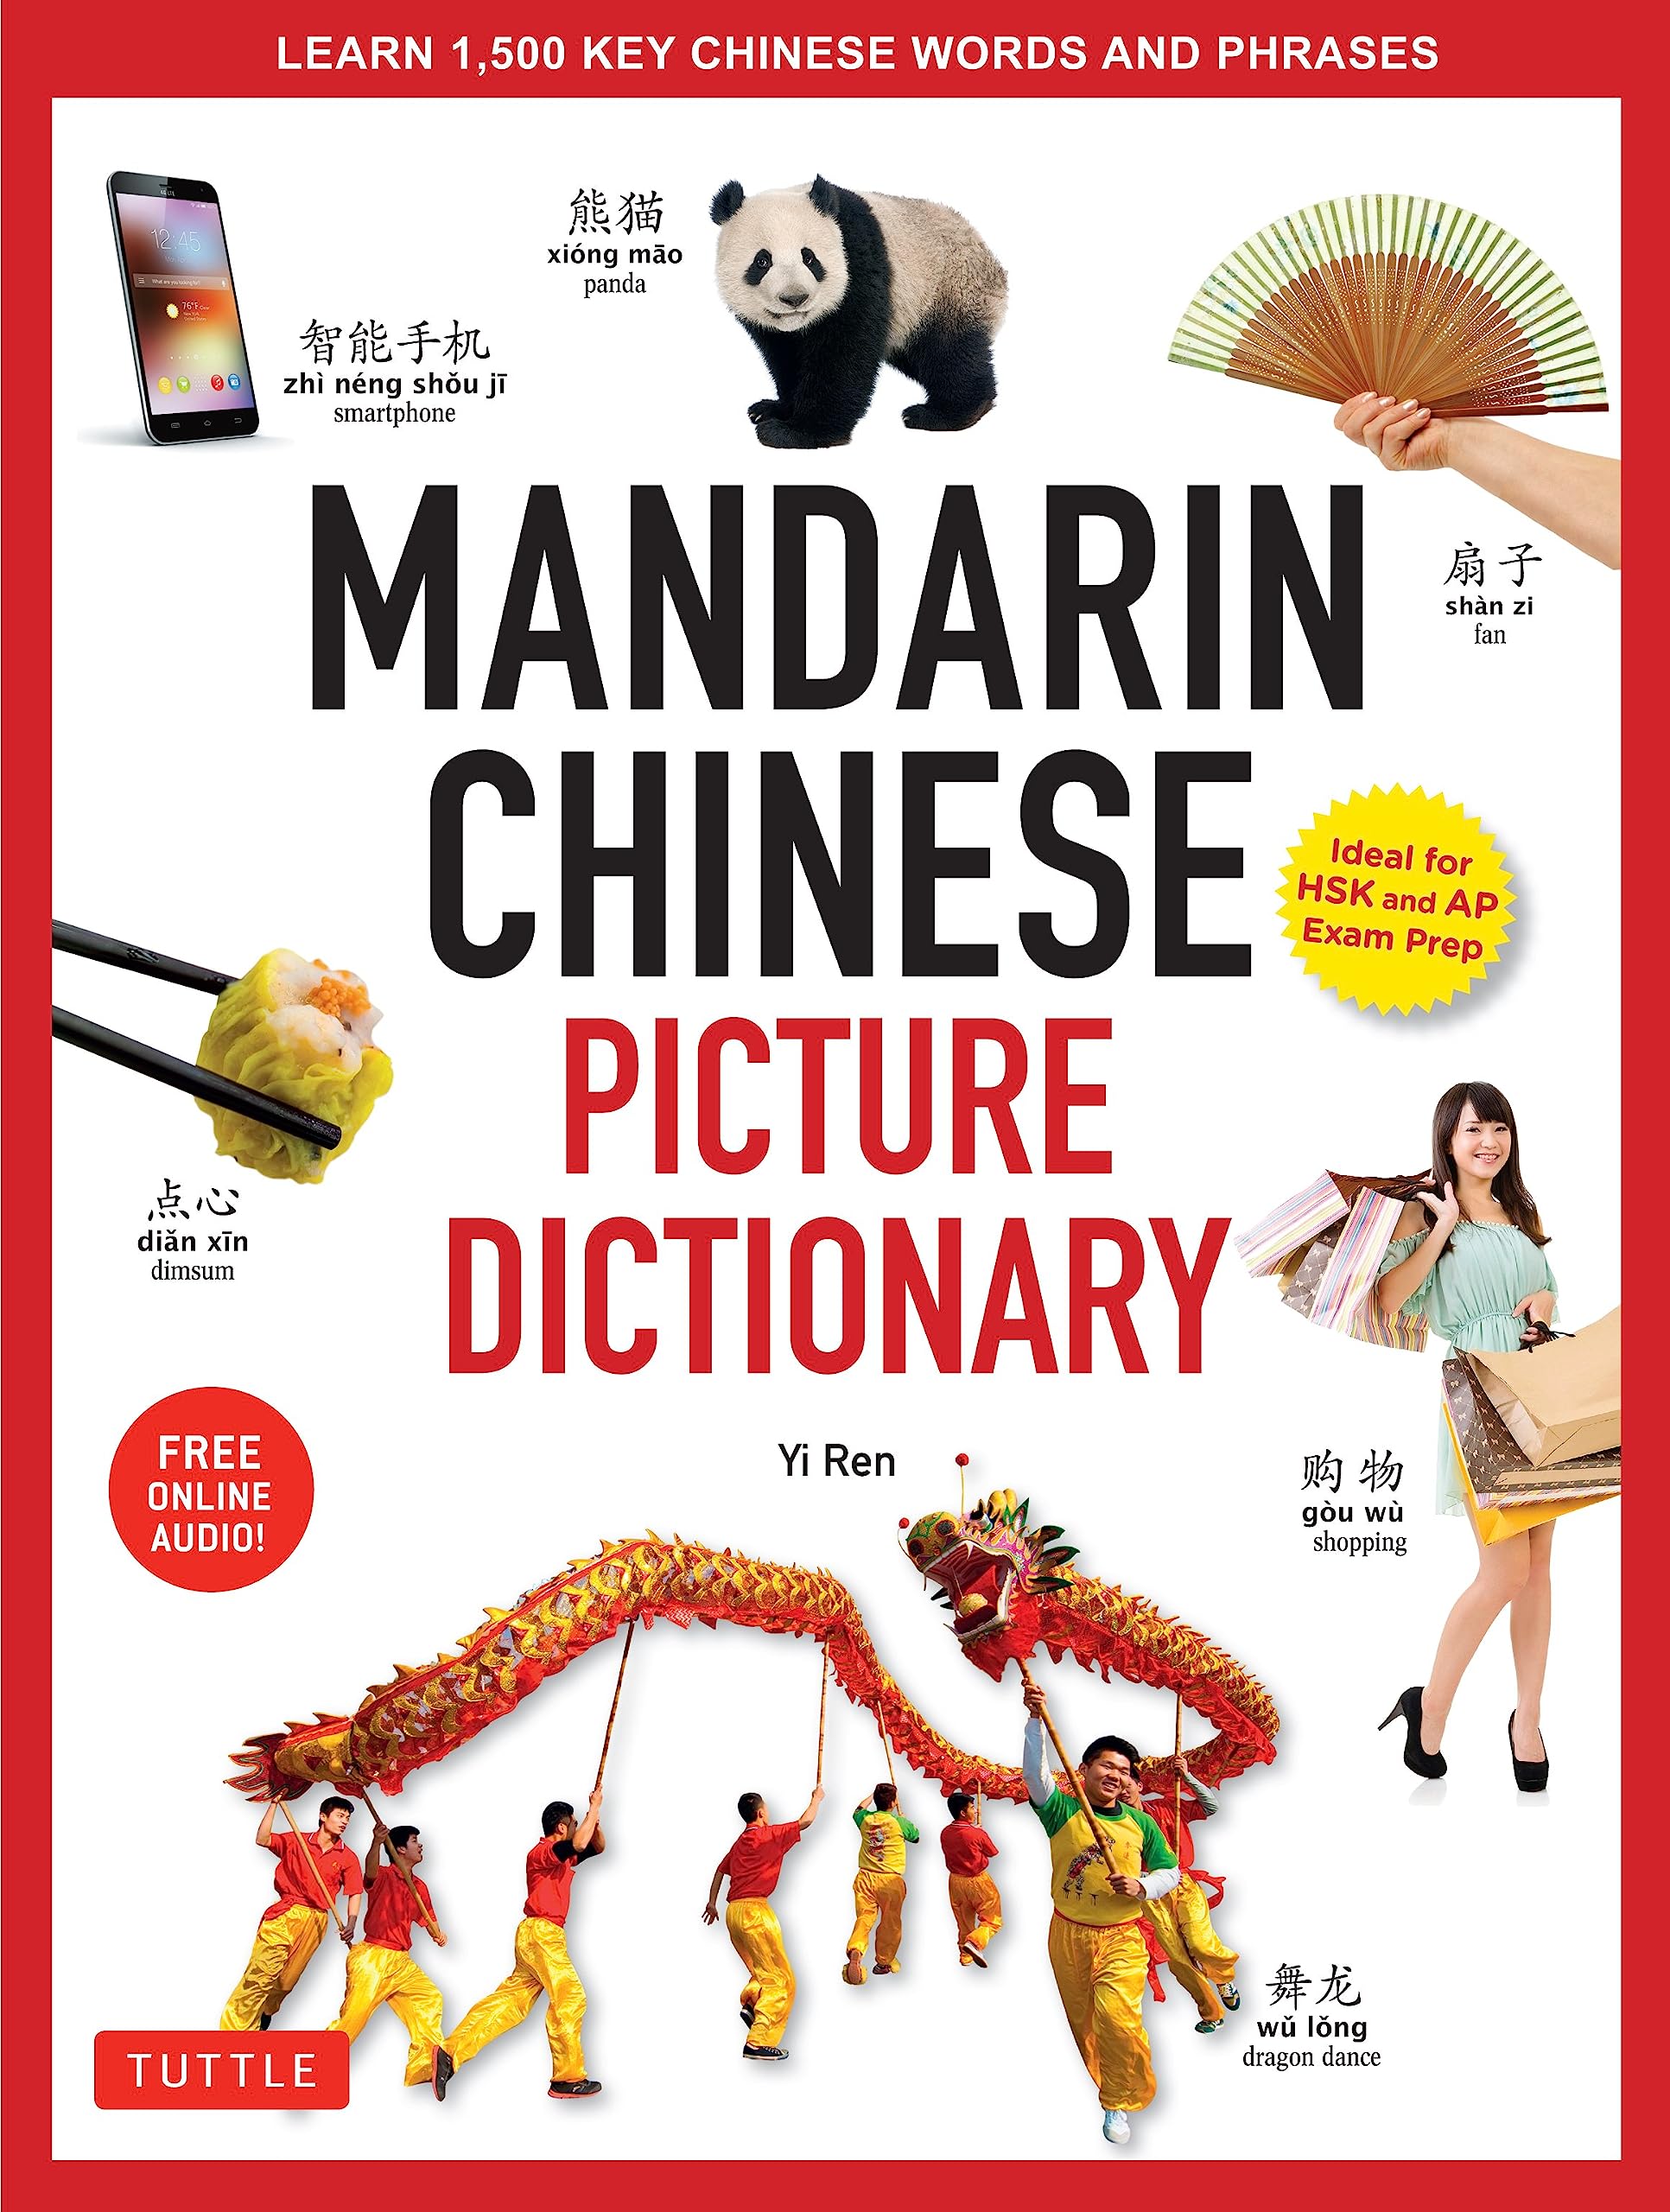 Book Cover Mandarin Chinese Picture Dictionary: Learn 1,500 Key Chinese Words and Phrases (Perfect for AP and HSK Exam Prep, Includes Online Audio) (Tuttle Picture Dictionary)